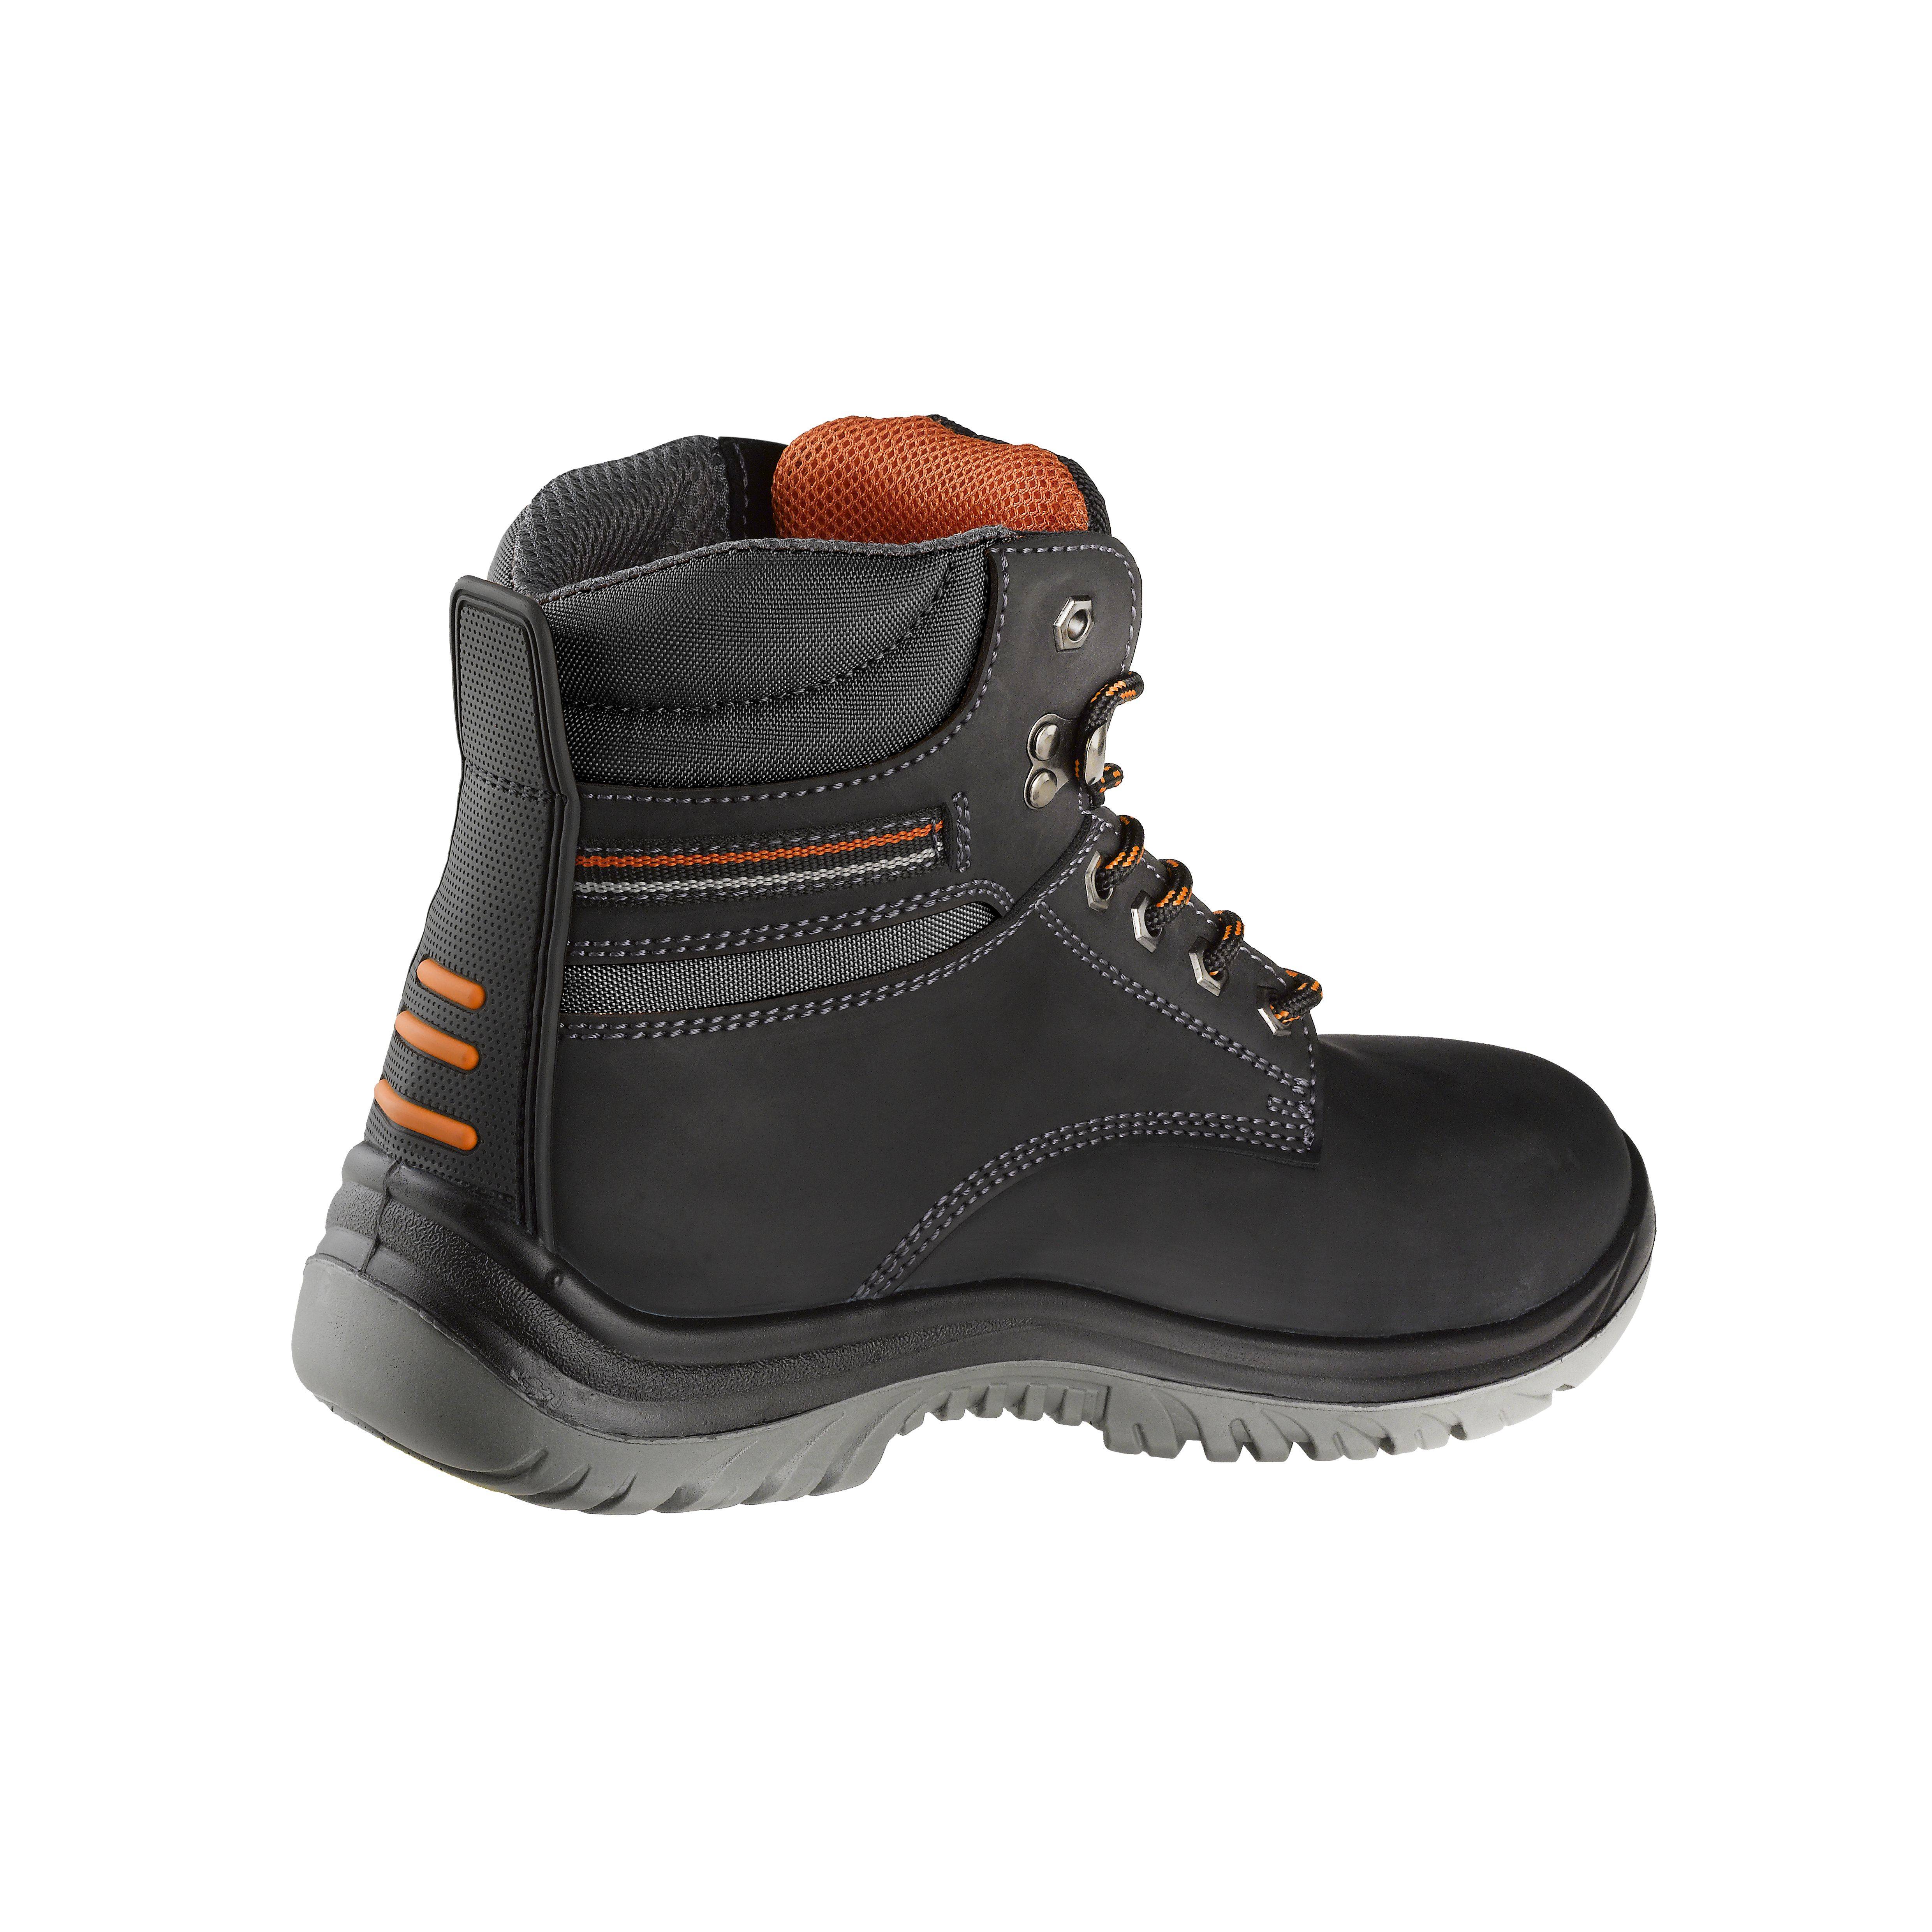 ACTION ANKLE BOOT | Warrior Protects